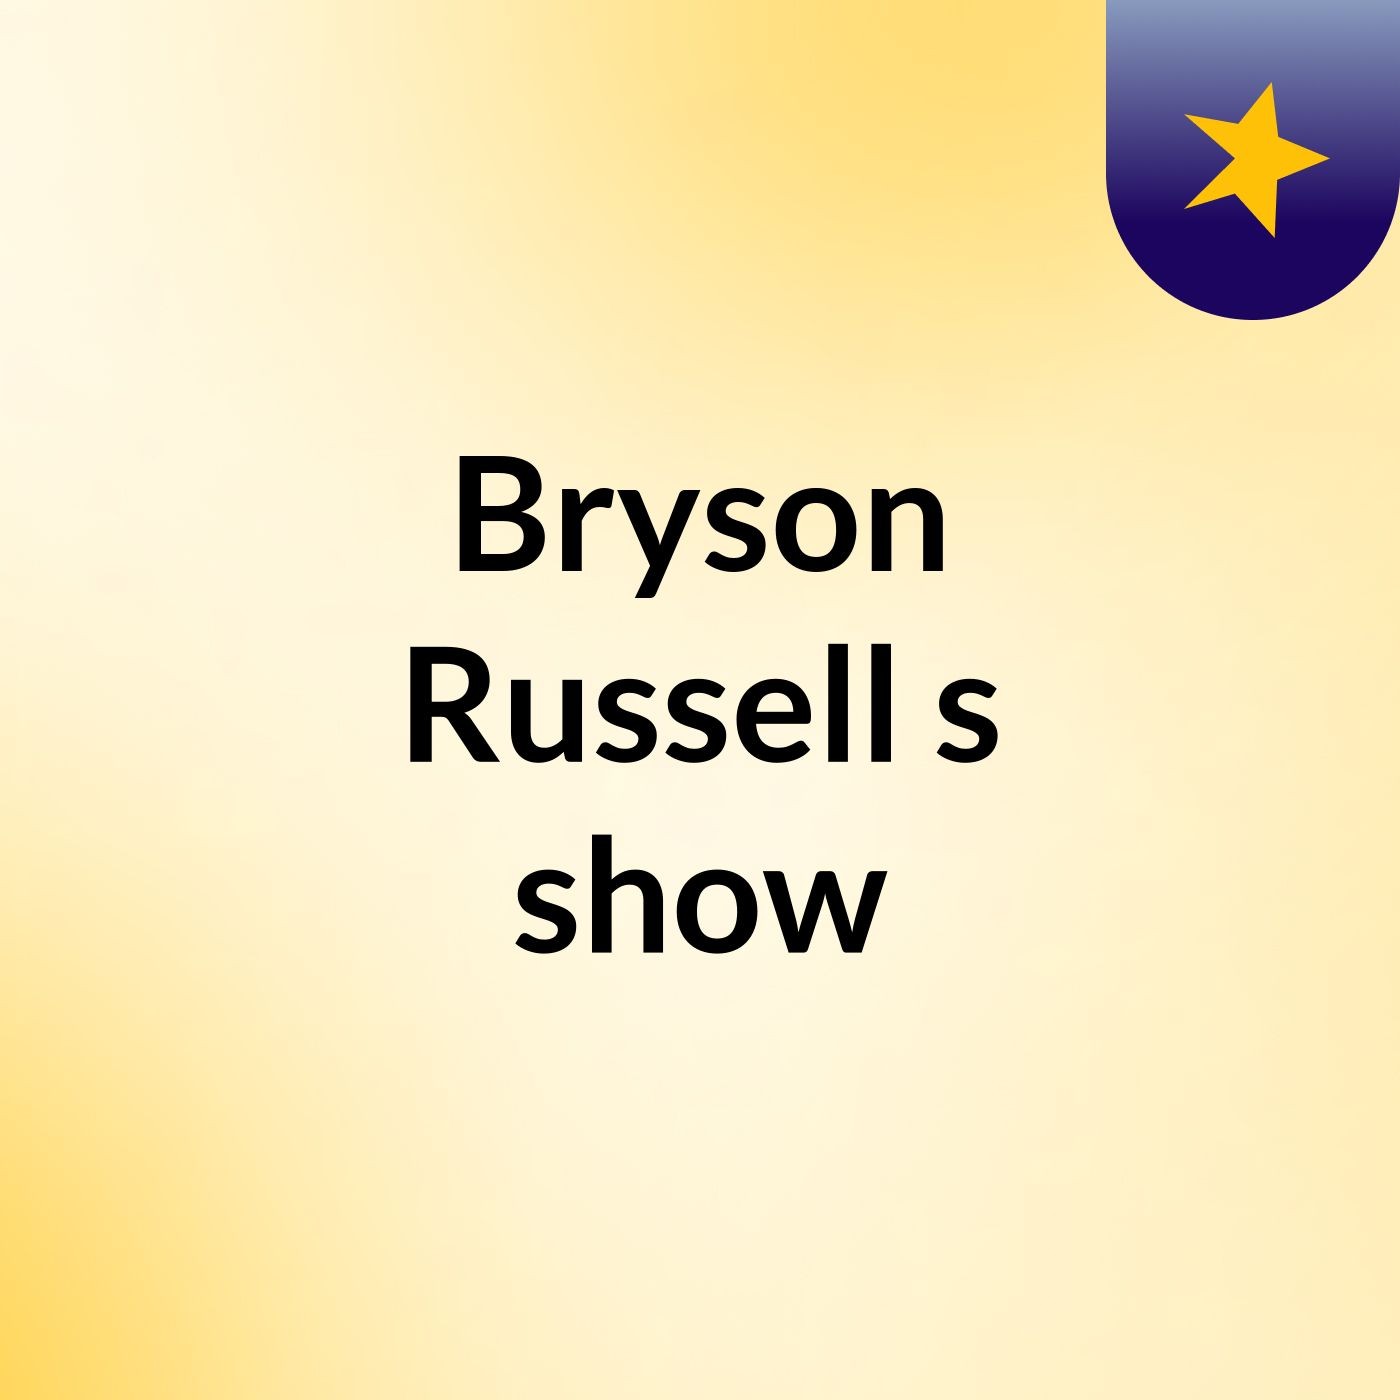 Episode 3 - Bryson Russell's show